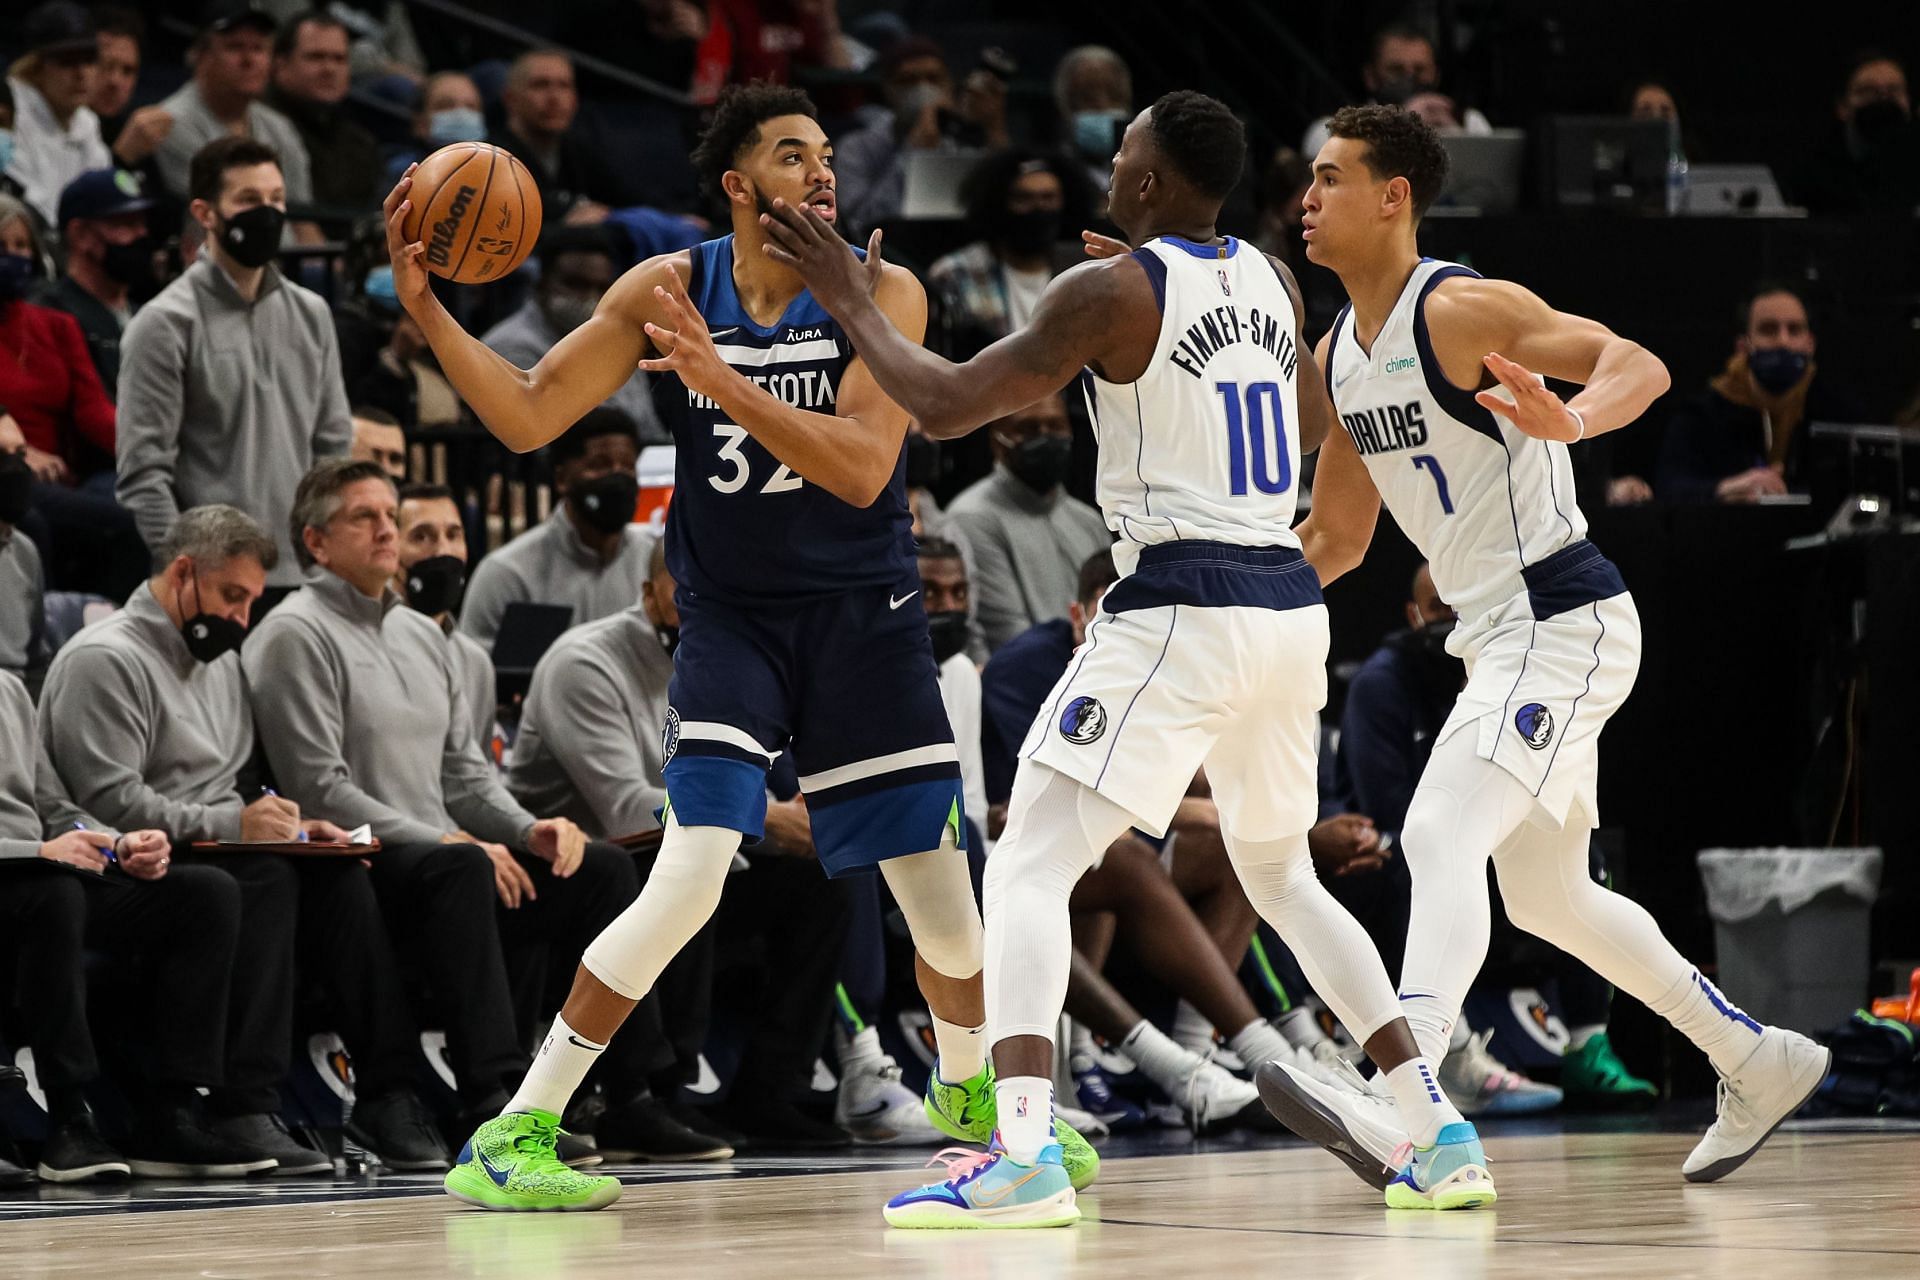 Karl-Anthony Towns of the Minnesota Timberwolves guarded by Dorian Finney-Smith of the Dallas Mavericks.